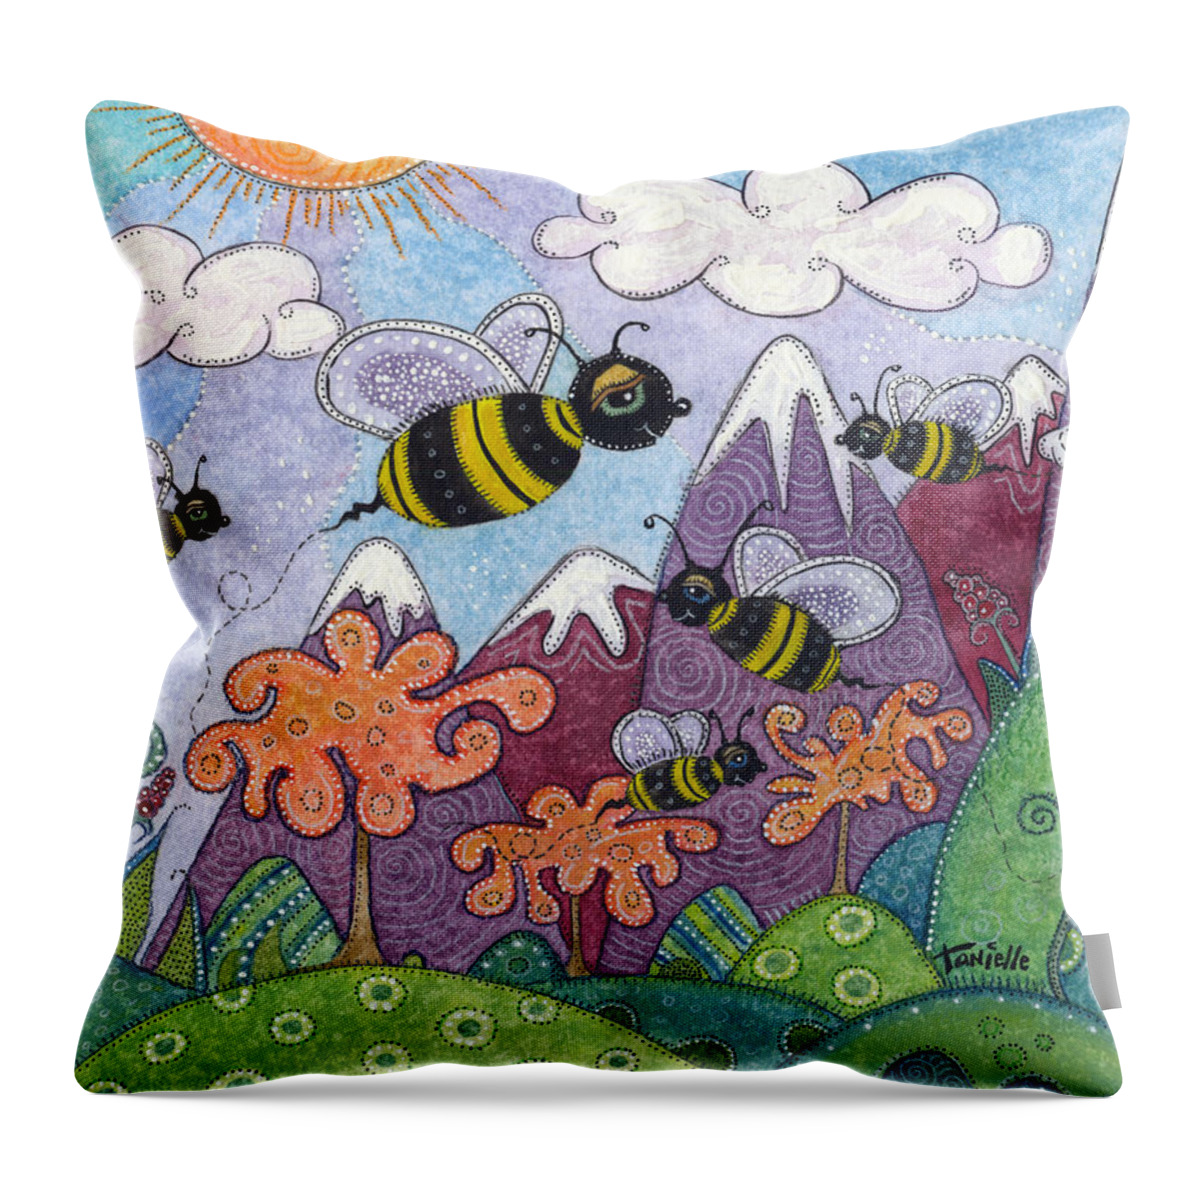 Whimsical Landscape Throw Pillow featuring the painting Bumble Bee Buzz by Tanielle Childers